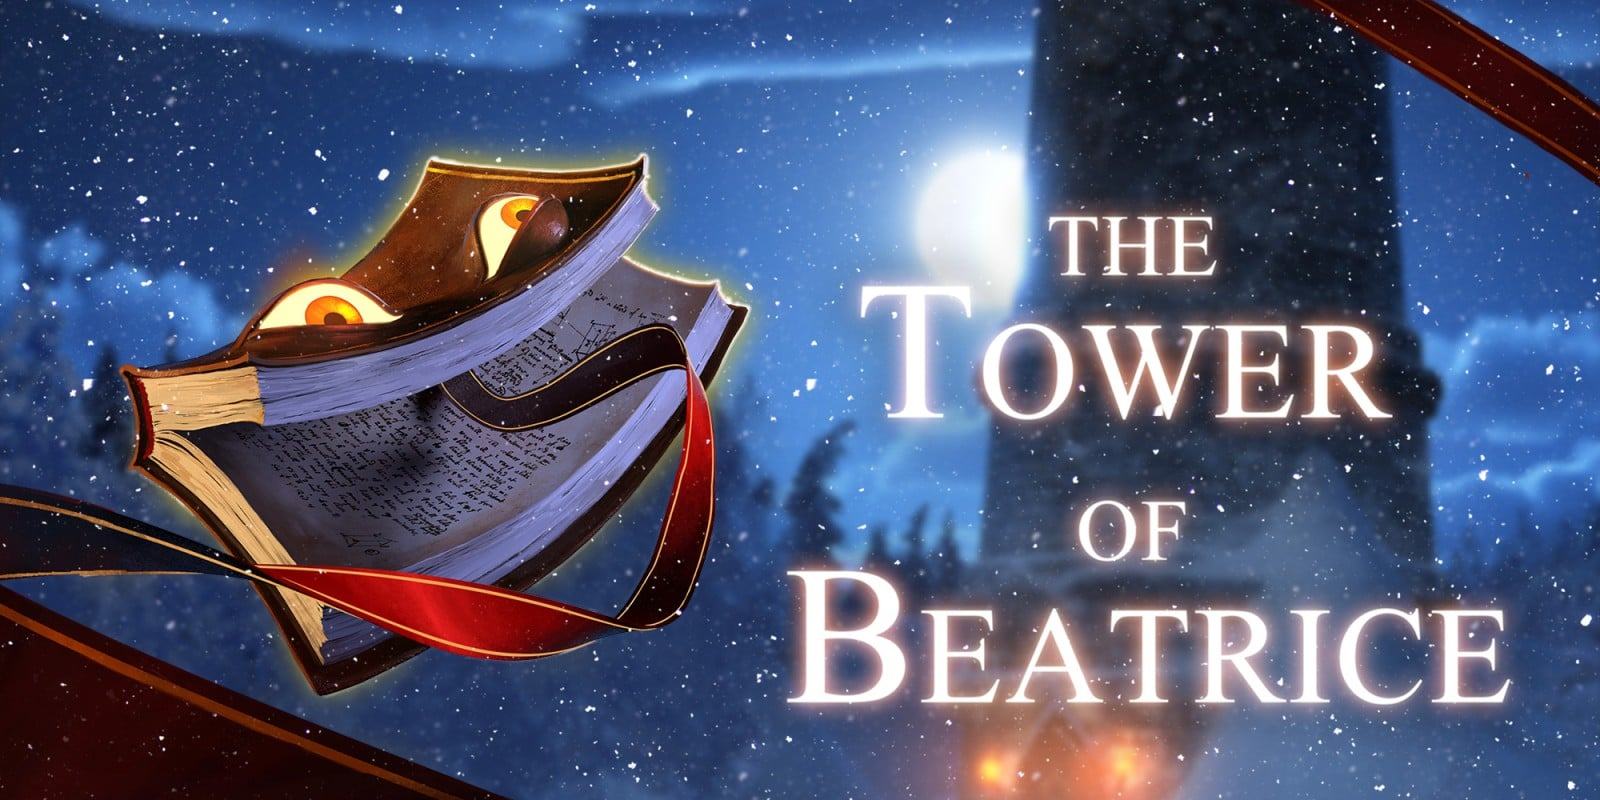 The Tower of Beatrice recensione review voto gameplay trailer video immagini ps4 steam pc ps vita xbox one